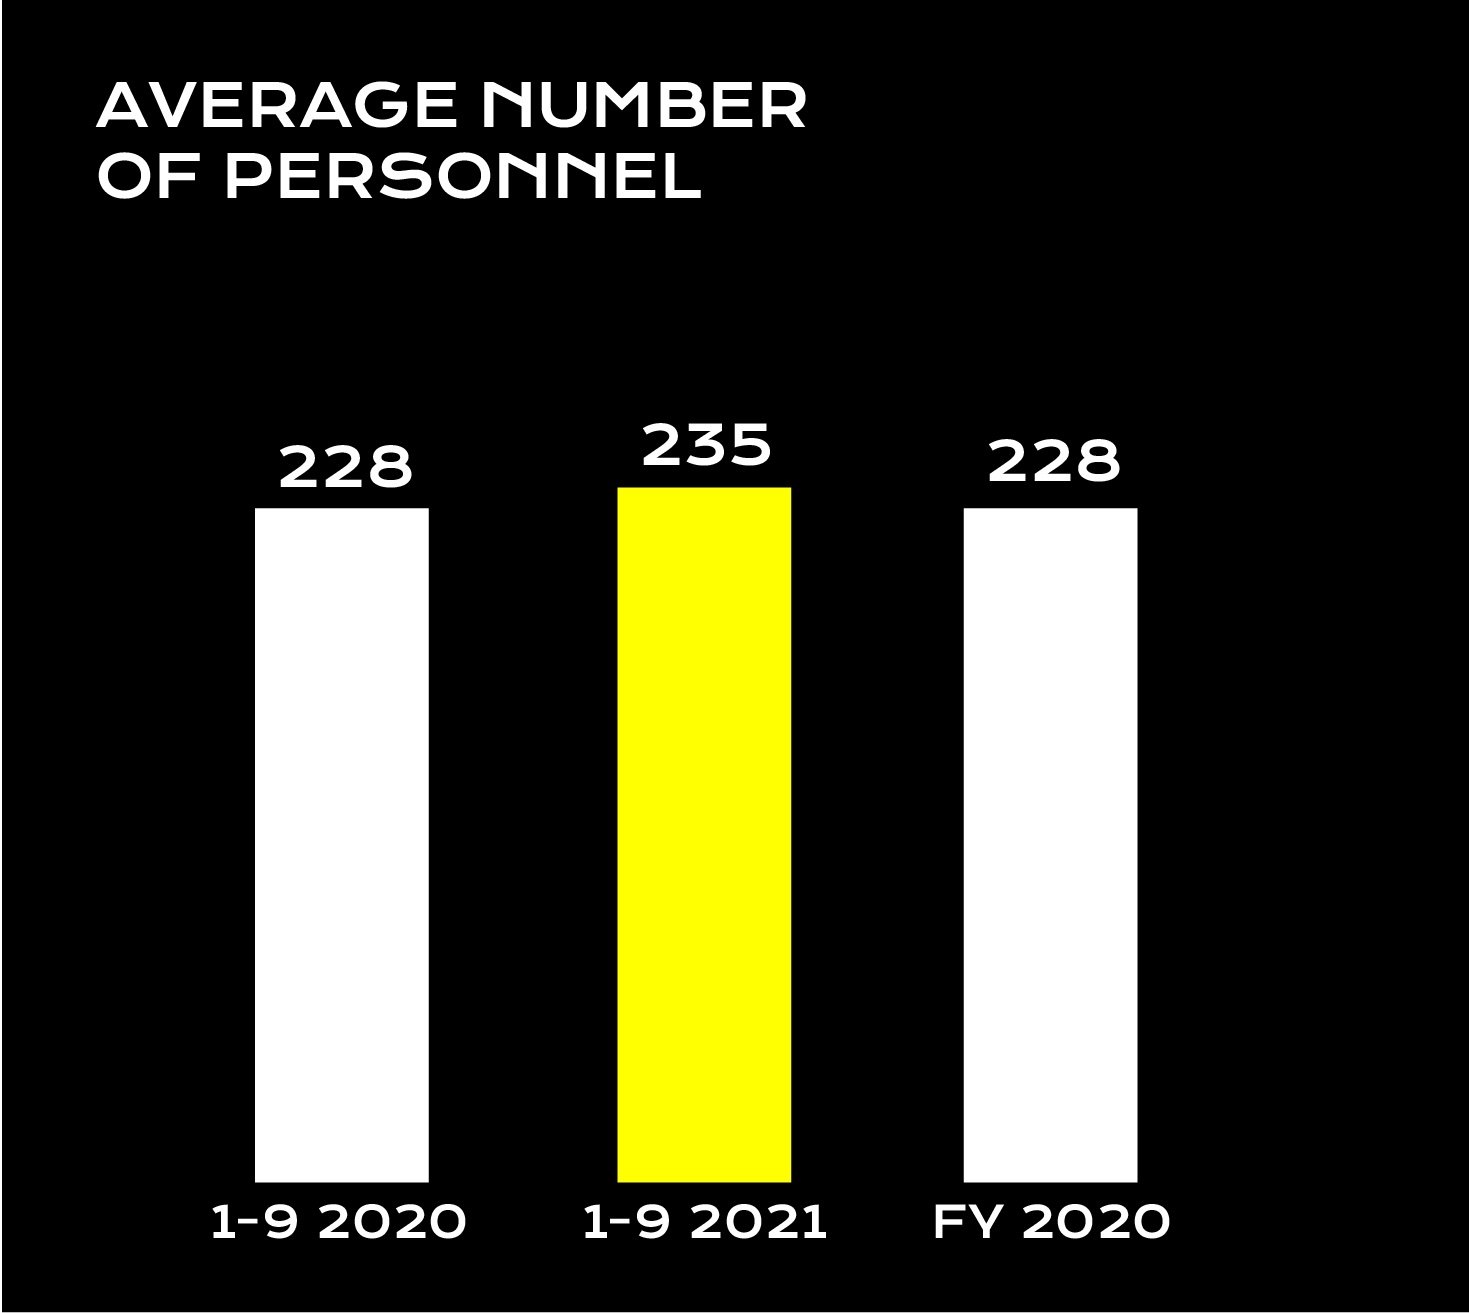 Average number of personnel 1-9 2021